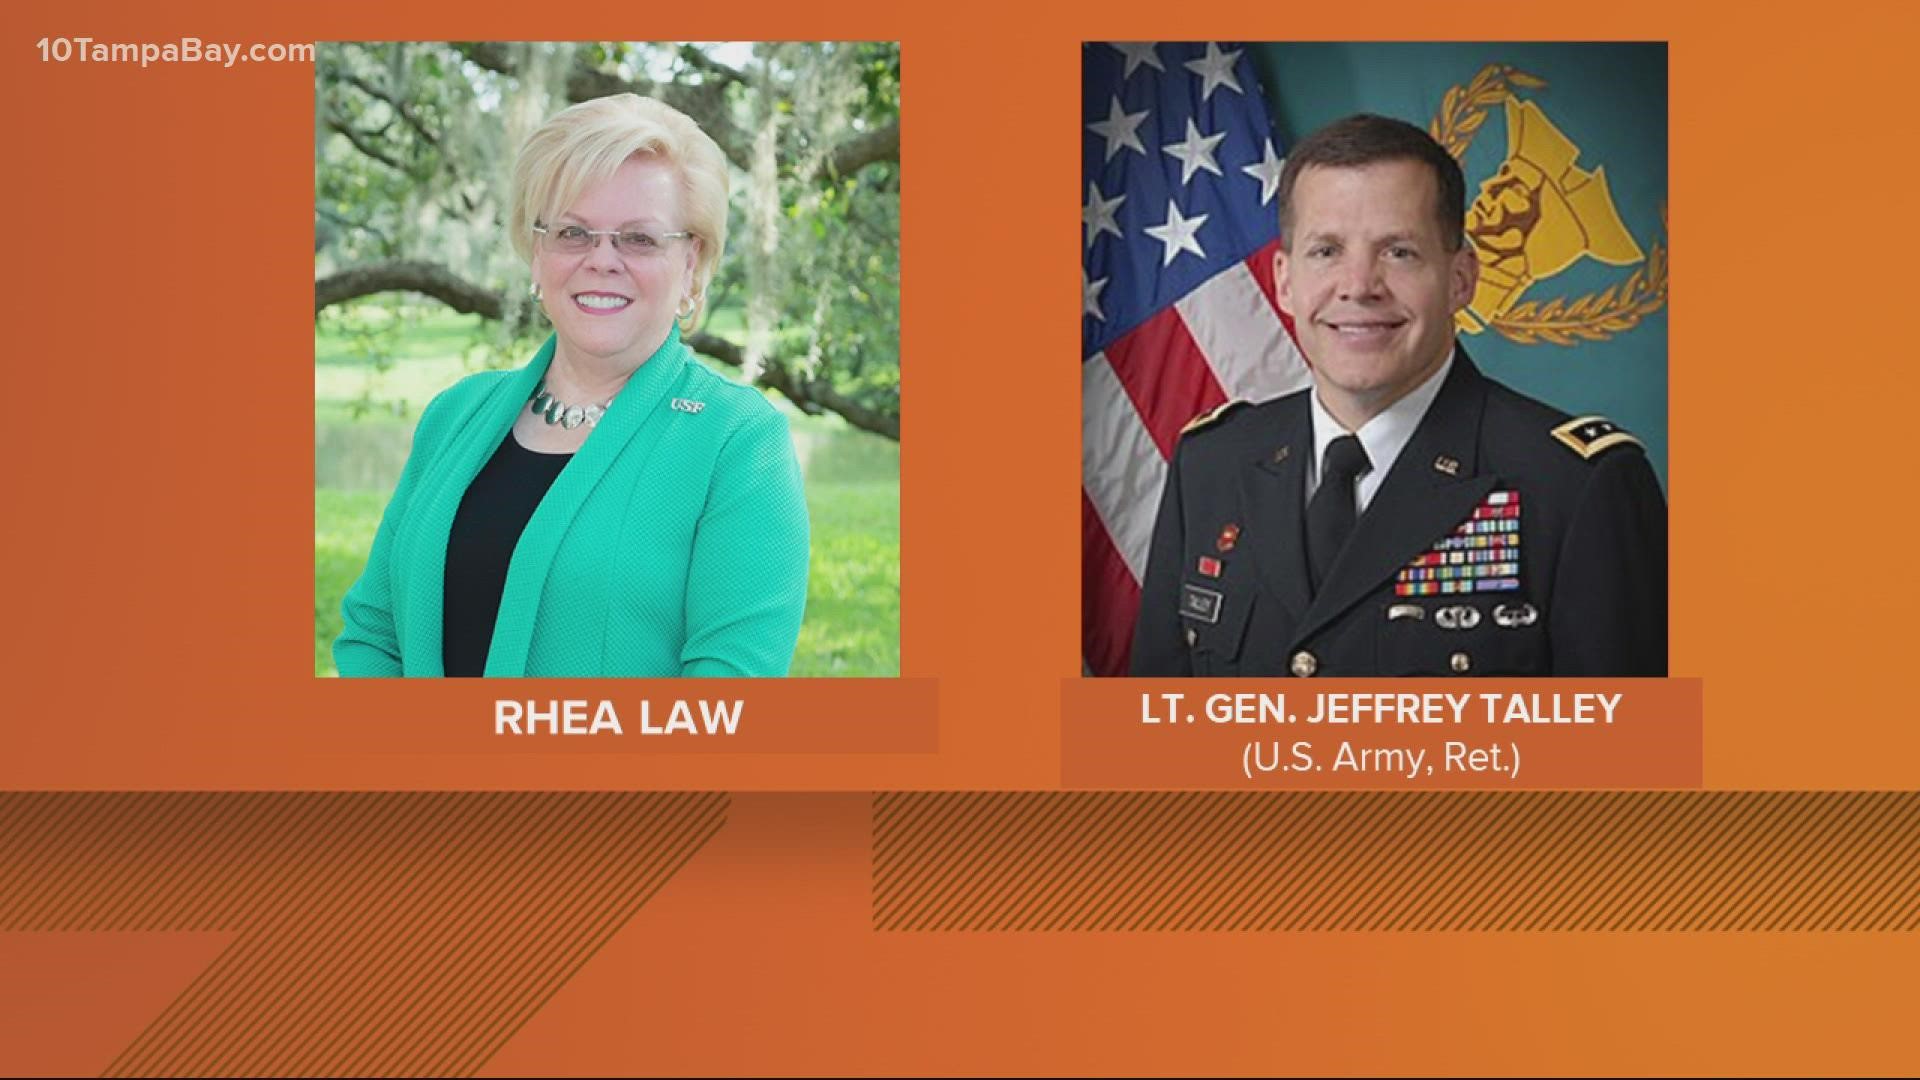 Interim president Rhea Law and Lt. Gen. Jeffrey Talley (U.S. Army, Ret.) are advancing to the interview stage.